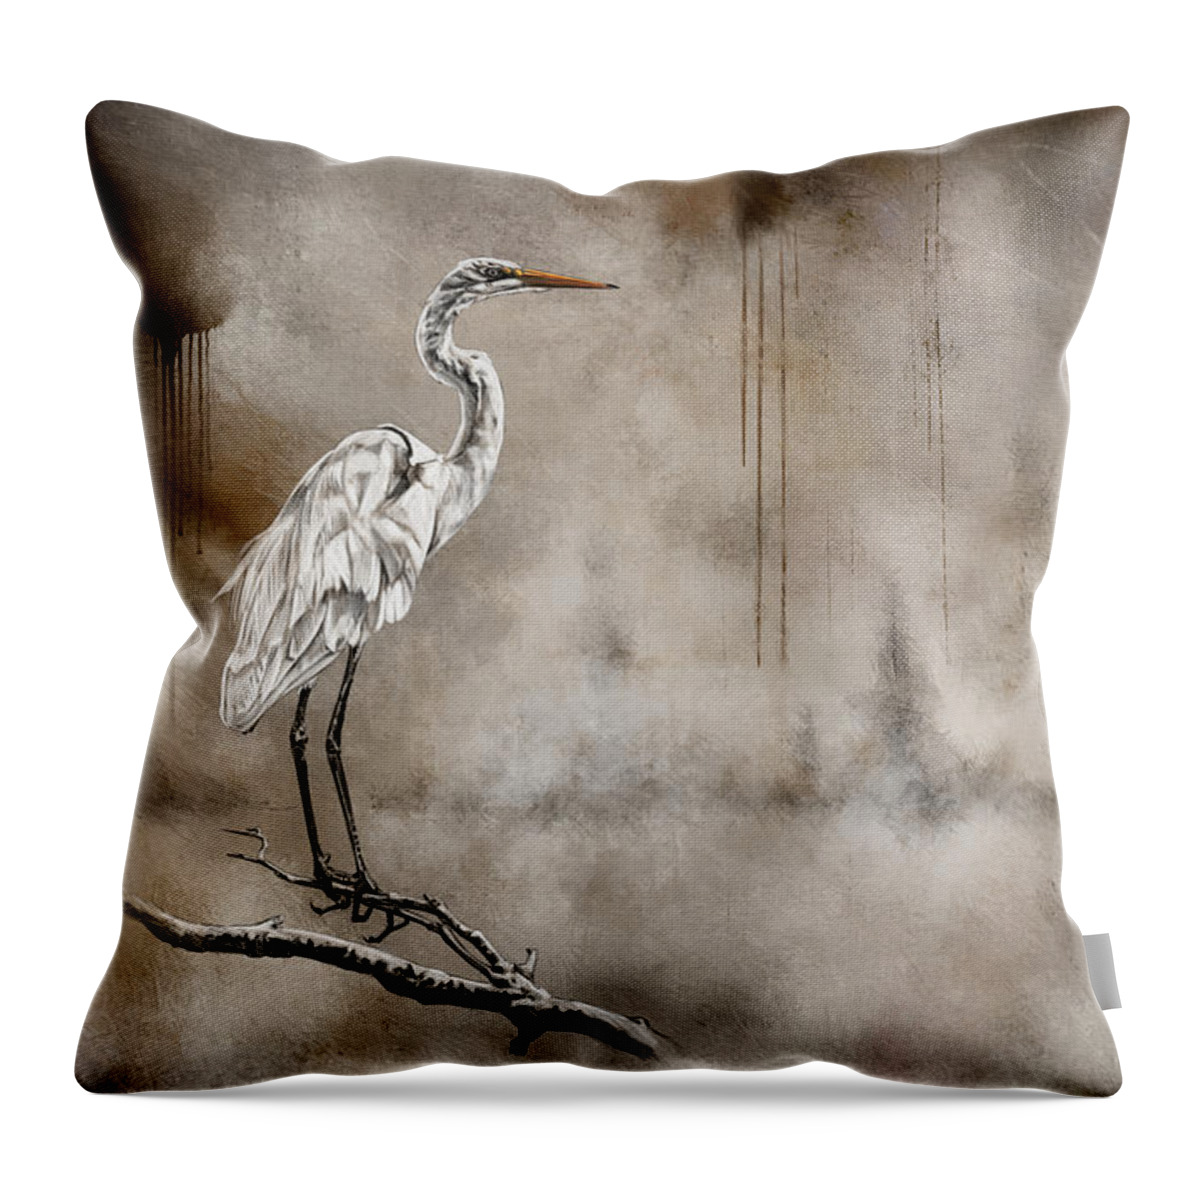 Abstract Throw Pillow featuring the digital art Snowy Egret on a Branch by Shawn Conn